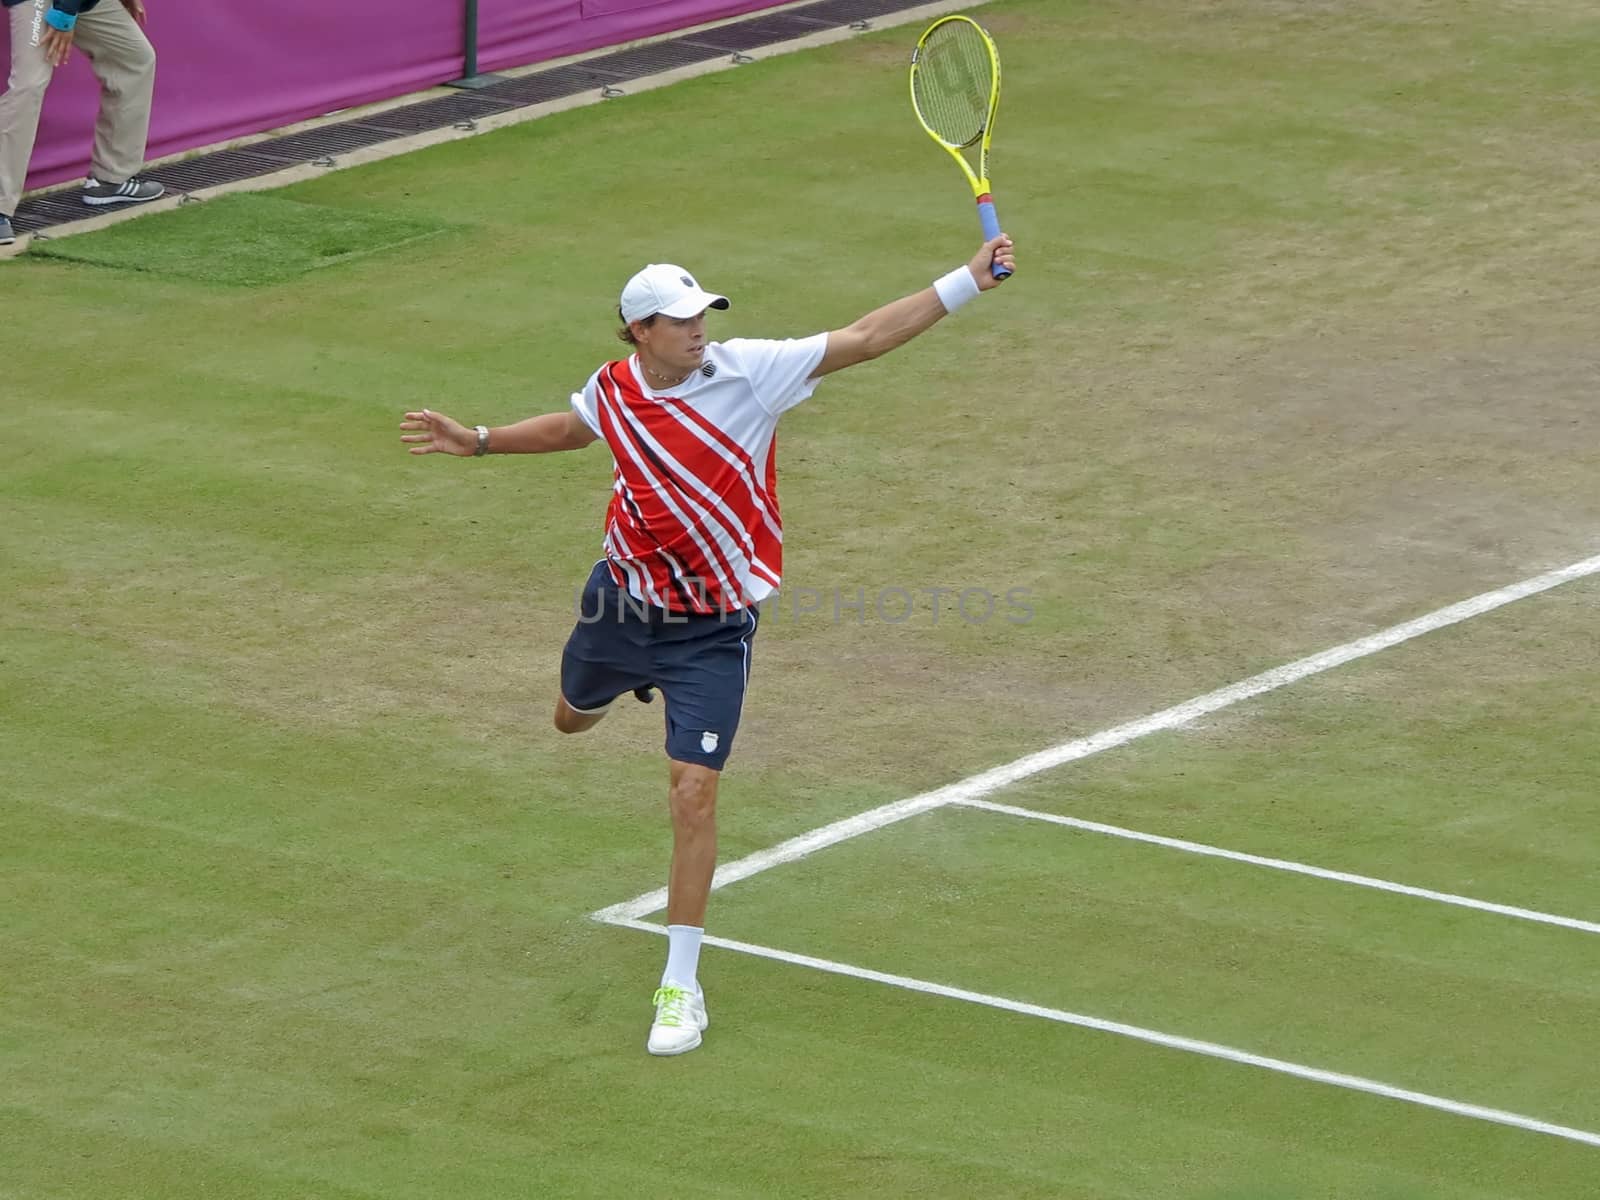 WIMBLEDON, ENGLAND - August 2nd, 2012 - Mike Bryan during one of his double matches at the summer Olympics in London in 2012. They went on to win the gold medal